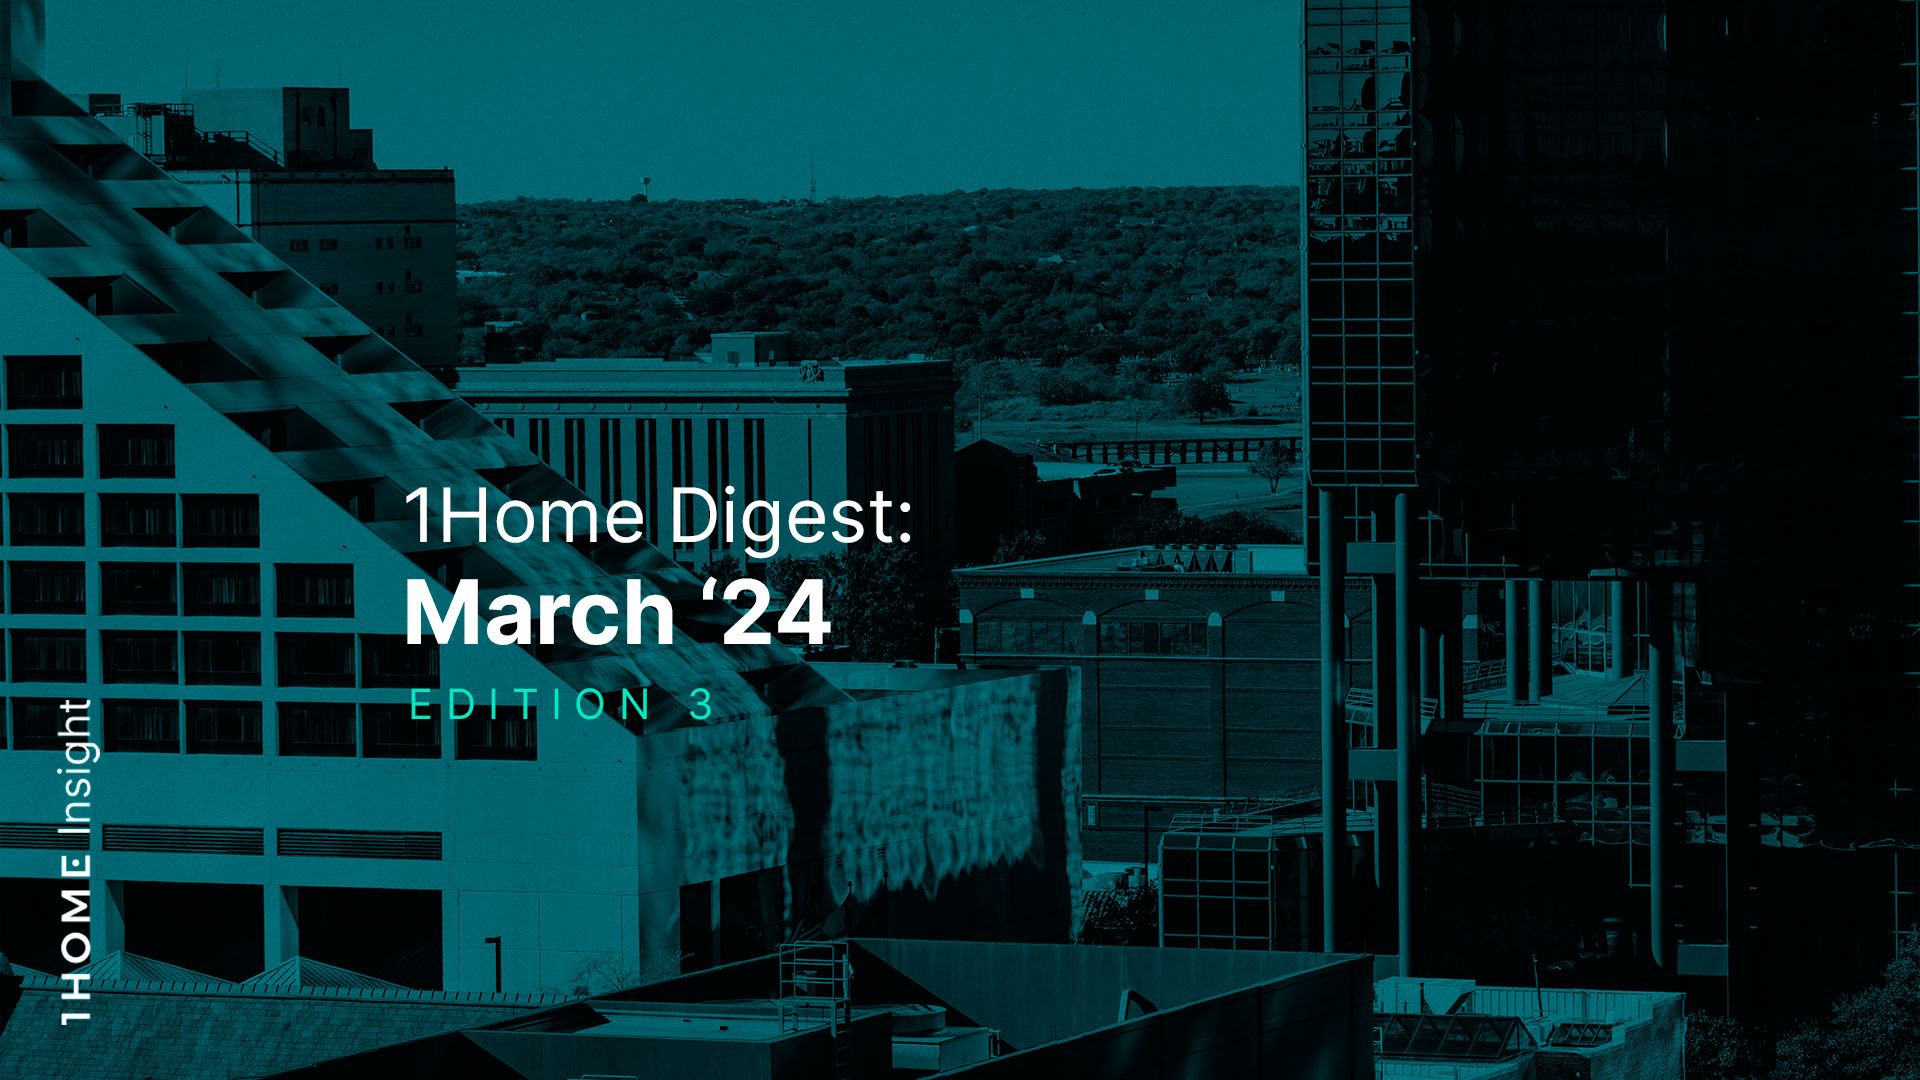 1Home Digest: March '24 Edition 3